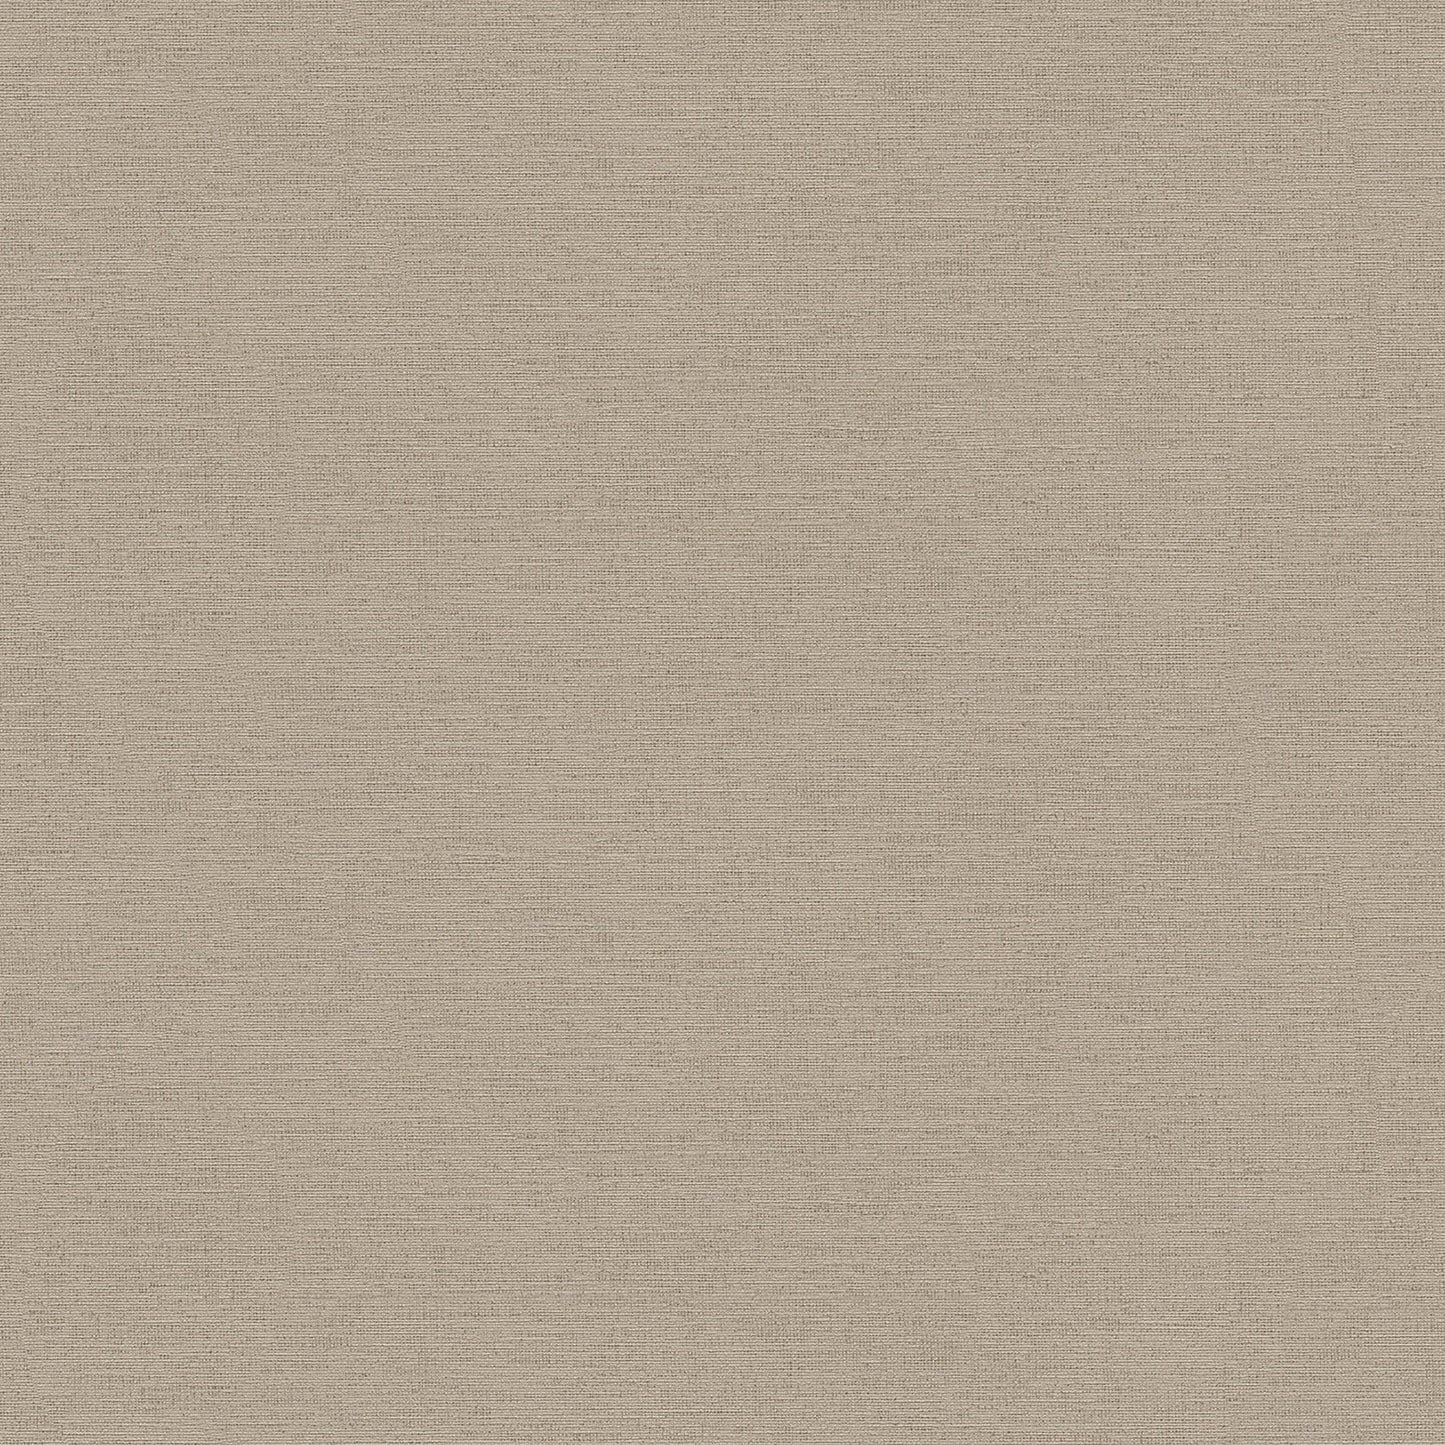 Find 4044-30689-3 Cuba Canseco Beige Distressed Texture Wallpaper Neutral by Advantage